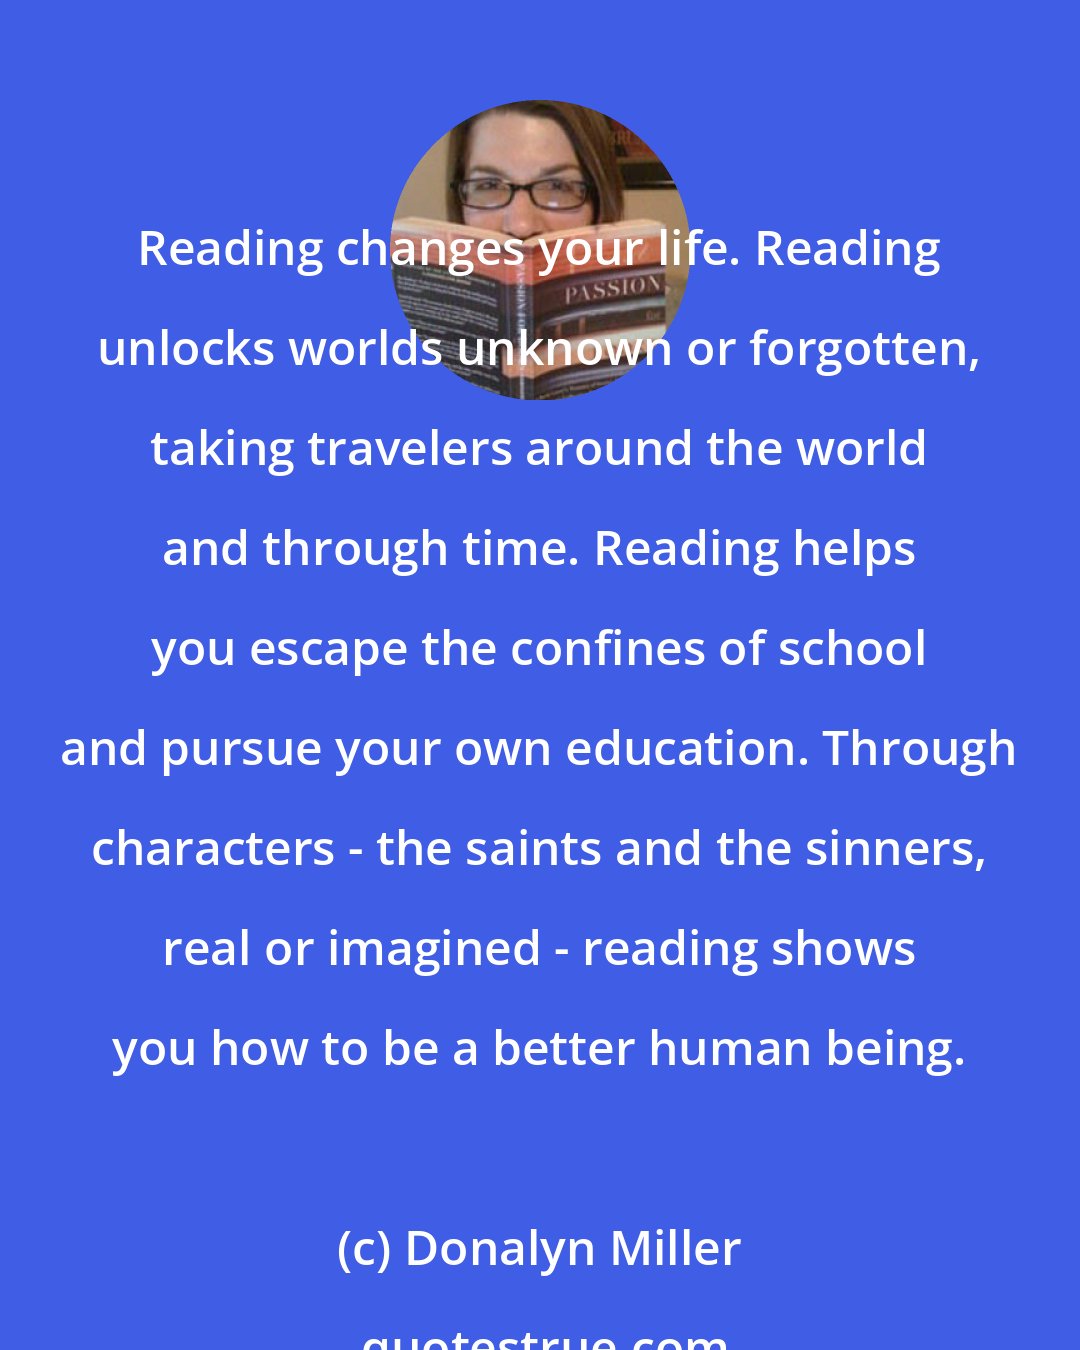 Donalyn Miller: Reading changes your life. Reading unlocks worlds unknown or forgotten, taking travelers around the world and through time. Reading helps you escape the confines of school and pursue your own education. Through characters - the saints and the sinners, real or imagined - reading shows you how to be a better human being.